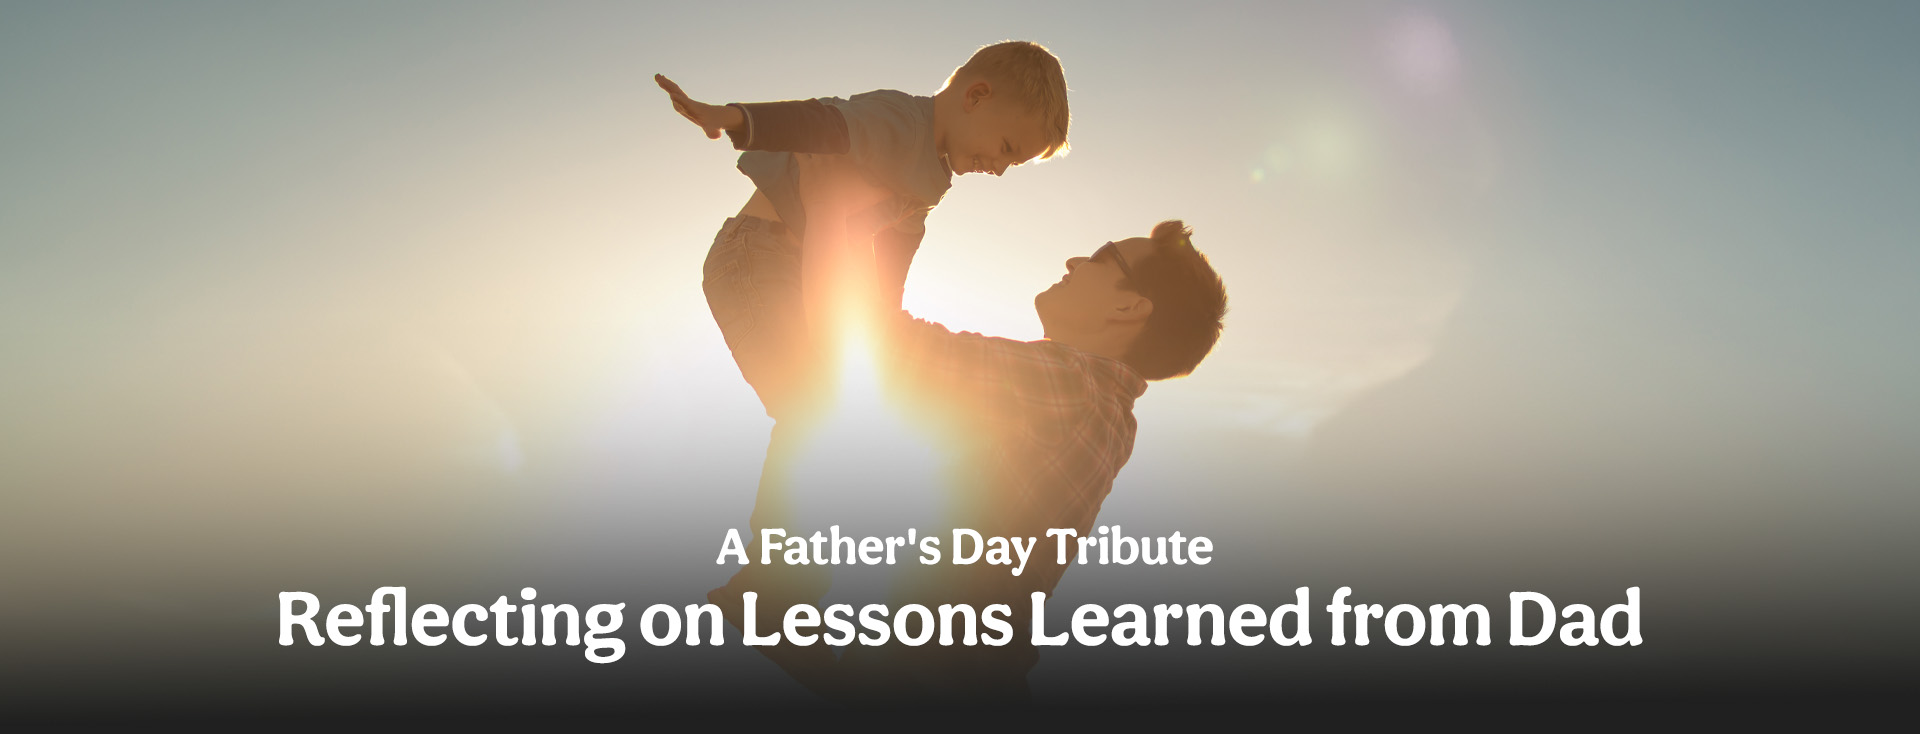 A Father's Day Tribute: Reflecting on Lessons Learned from Dad